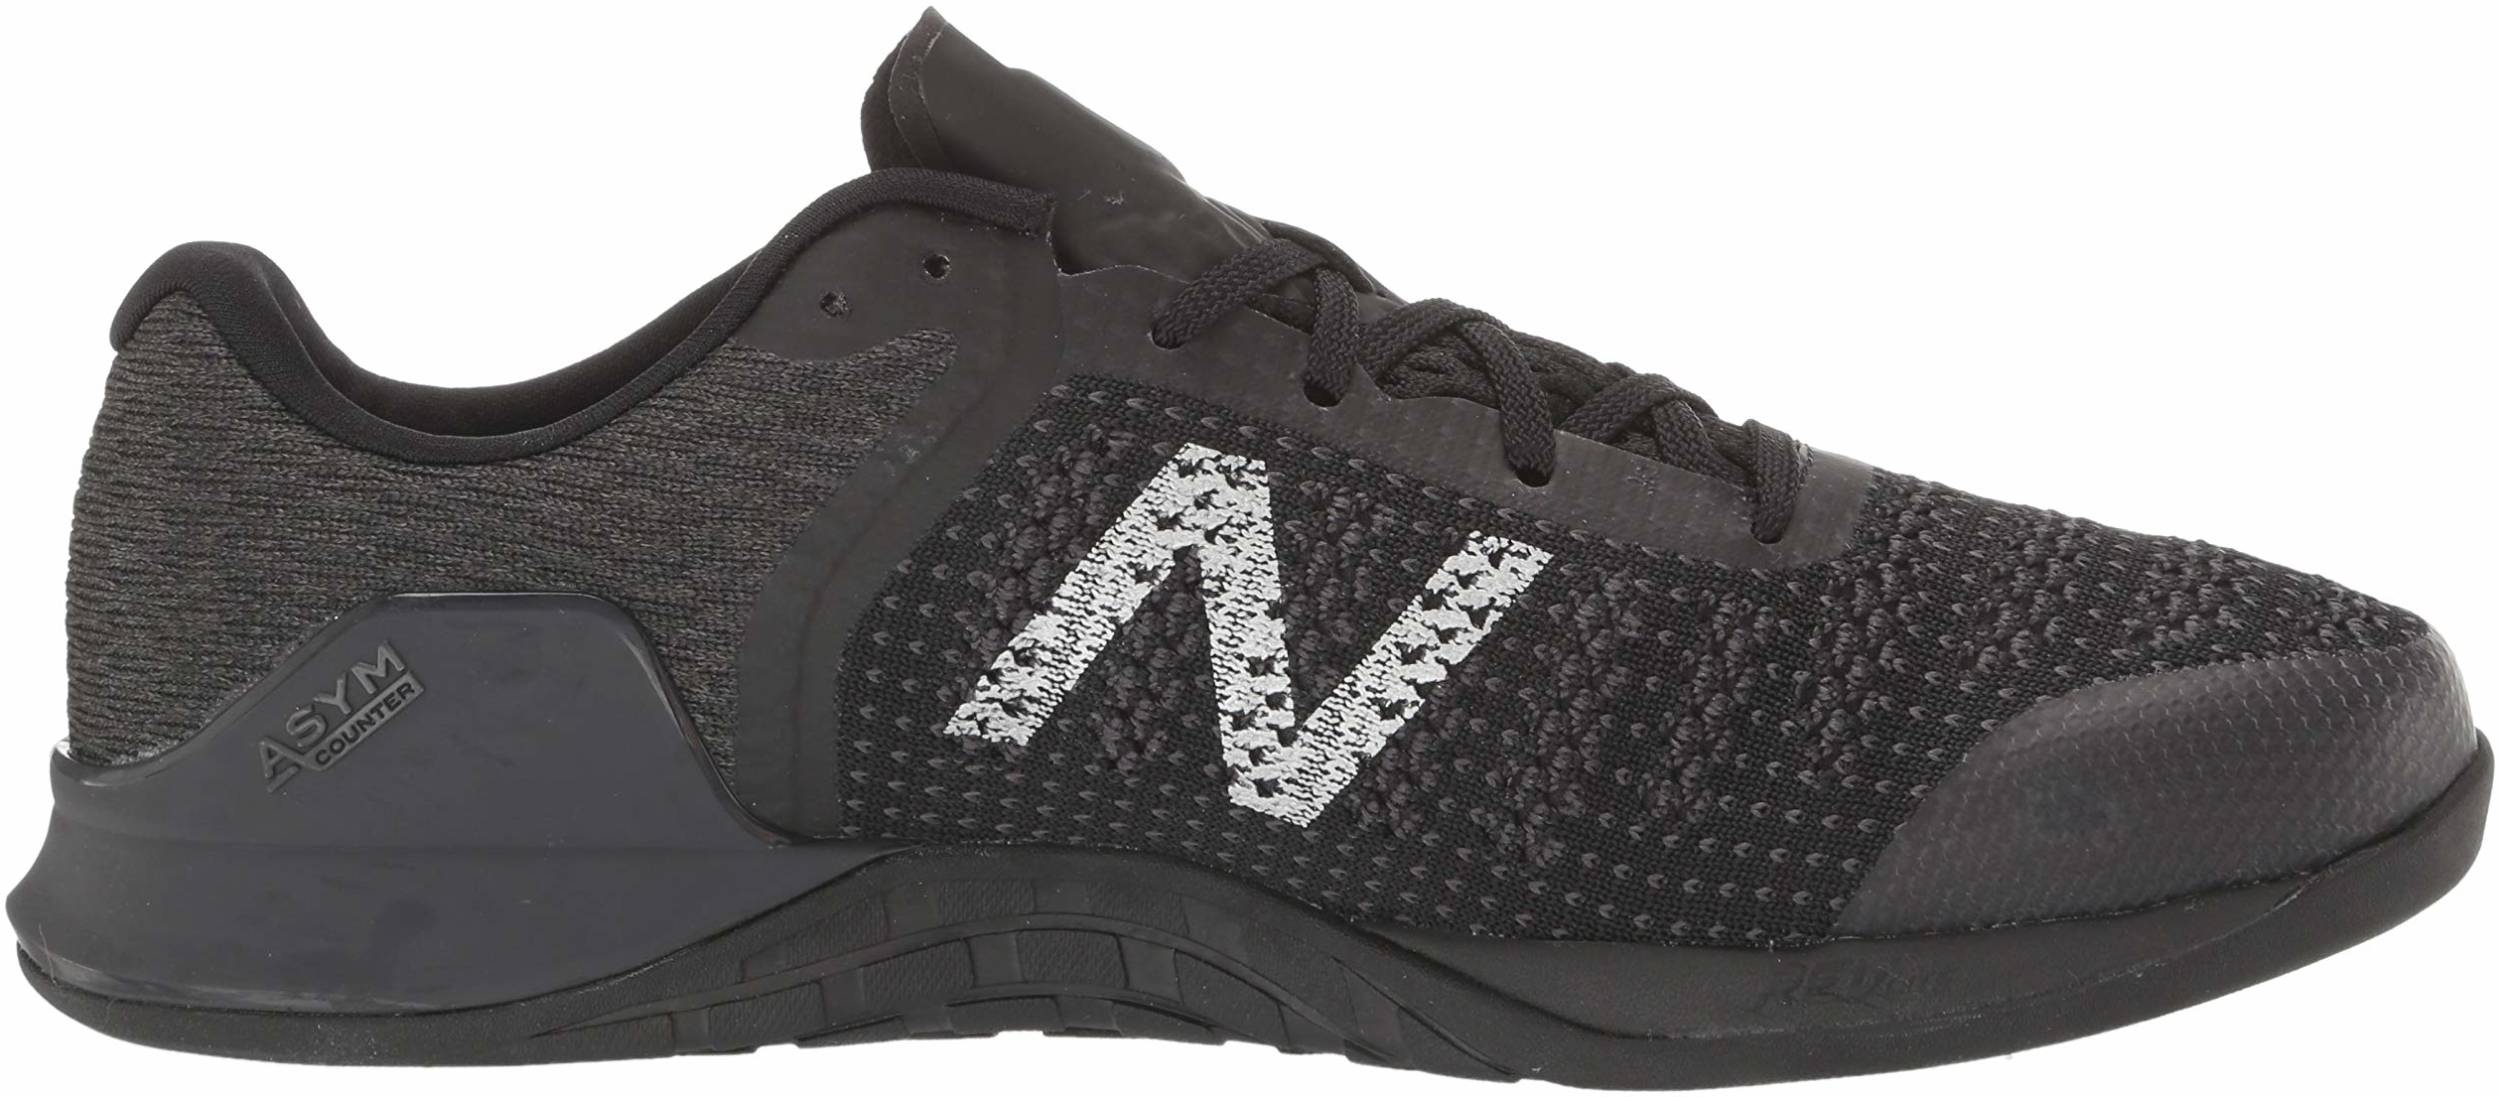 Review of New Balance Minimus Prevail 